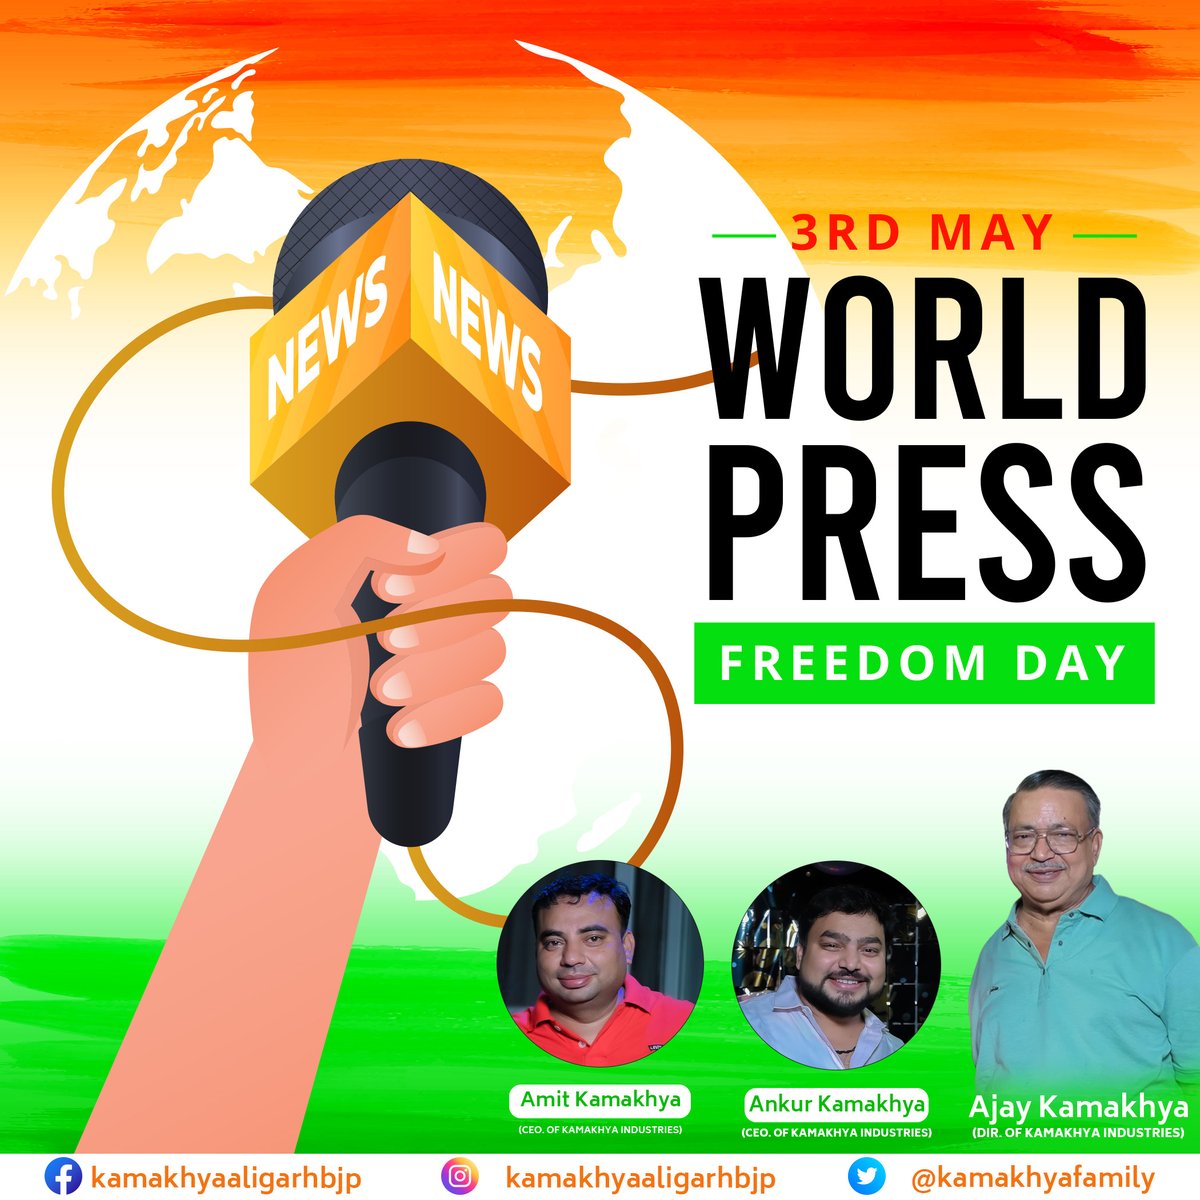 Freedom of the press is essential for a free society. Let's protect and cherish it. Happy World Press Freedom Day!
.
.
#PressFreedom #WorldPressFreedomDay #FreePress #JournalismMatters #TruthPrevails #DefendPressFreedom #ProtectJournalists #FreeSpeech #MediaFreedom